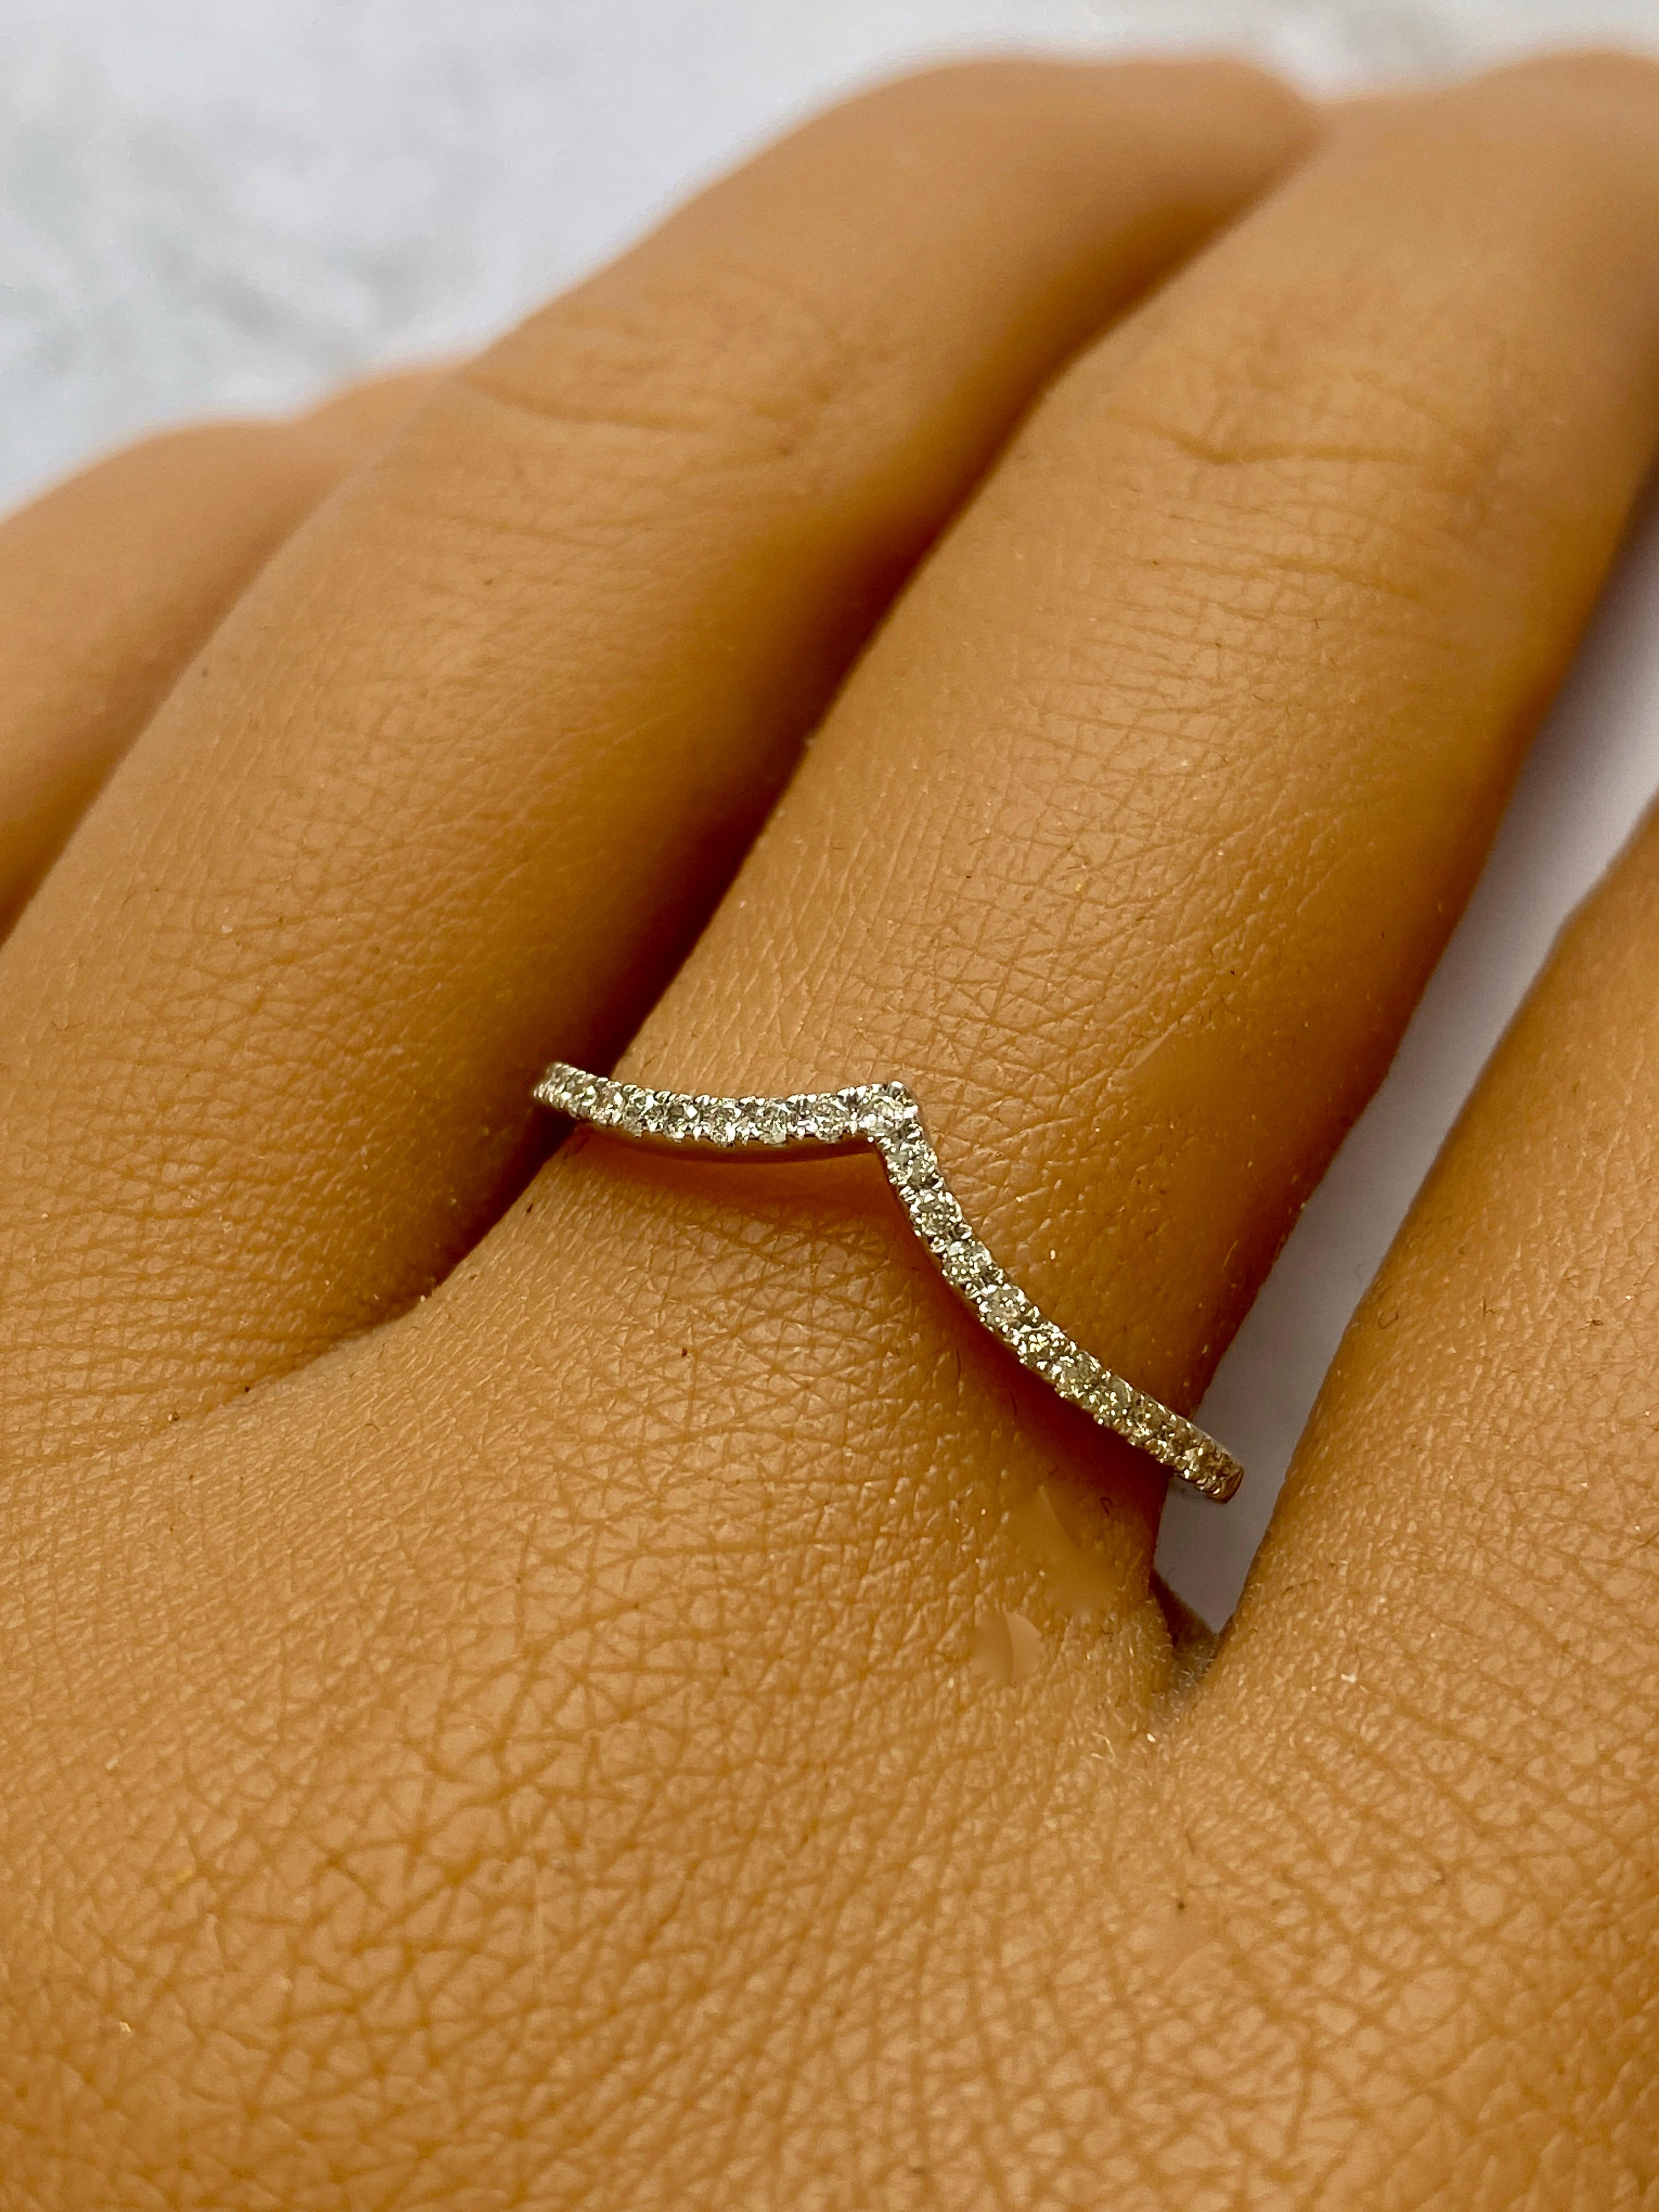 Diamond Stacking Band! You can wear this band with another diamond ring or a diamond engagement band or even by itself! Made in 14k white gold and set with natural white diamonds, this ring is waiting for you! Pair it up with a gemstone ring, or